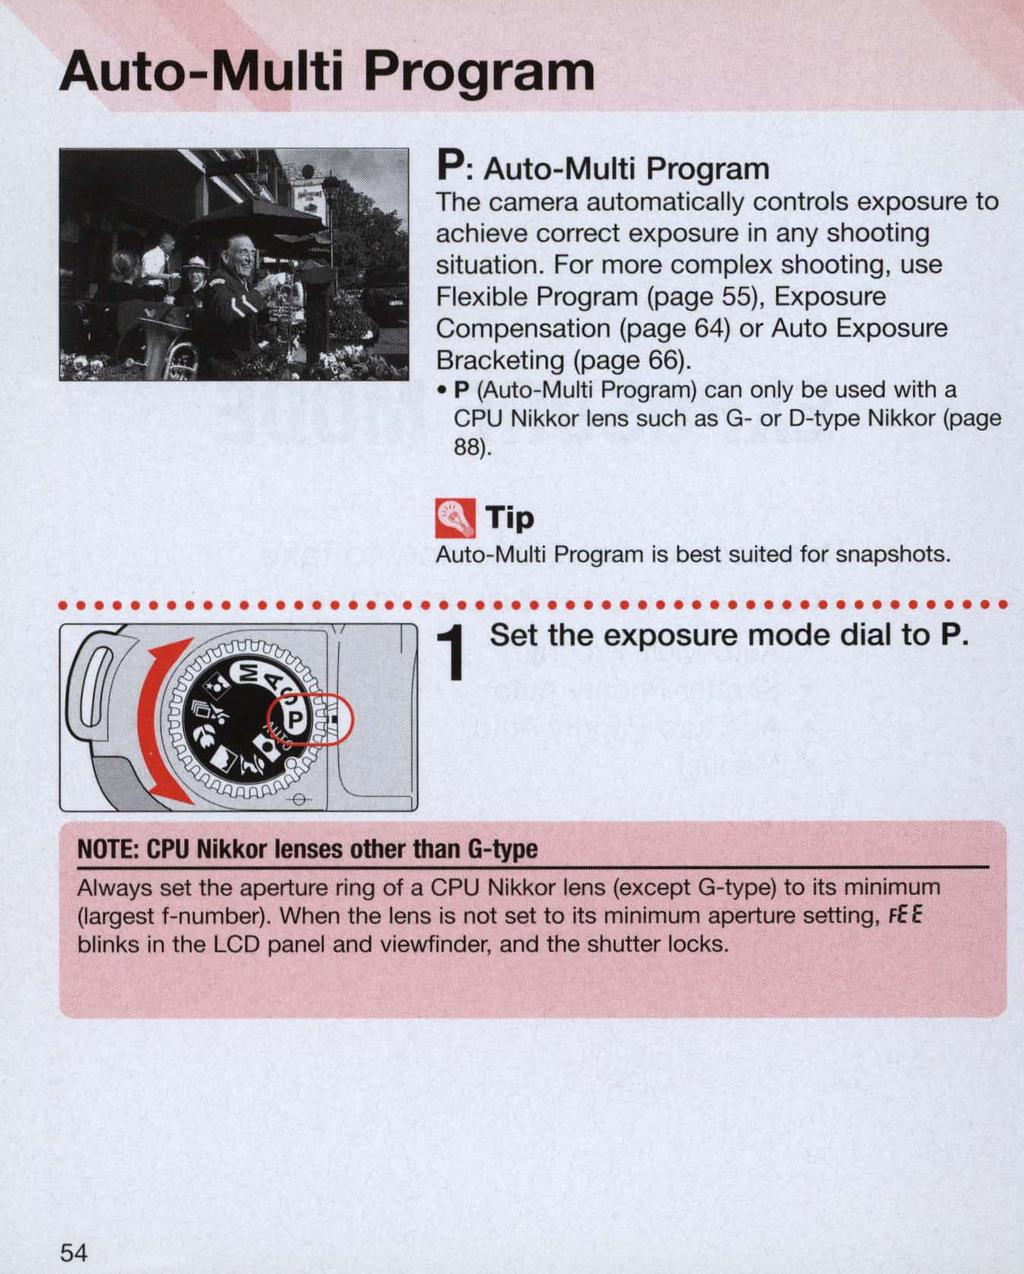 Auto-Multi Program P: Auto-Multi Program The camera automatically controls exposure to achieve correct exposure in any shooting situation. For more complex shooting. use Flexible Program (page 55).